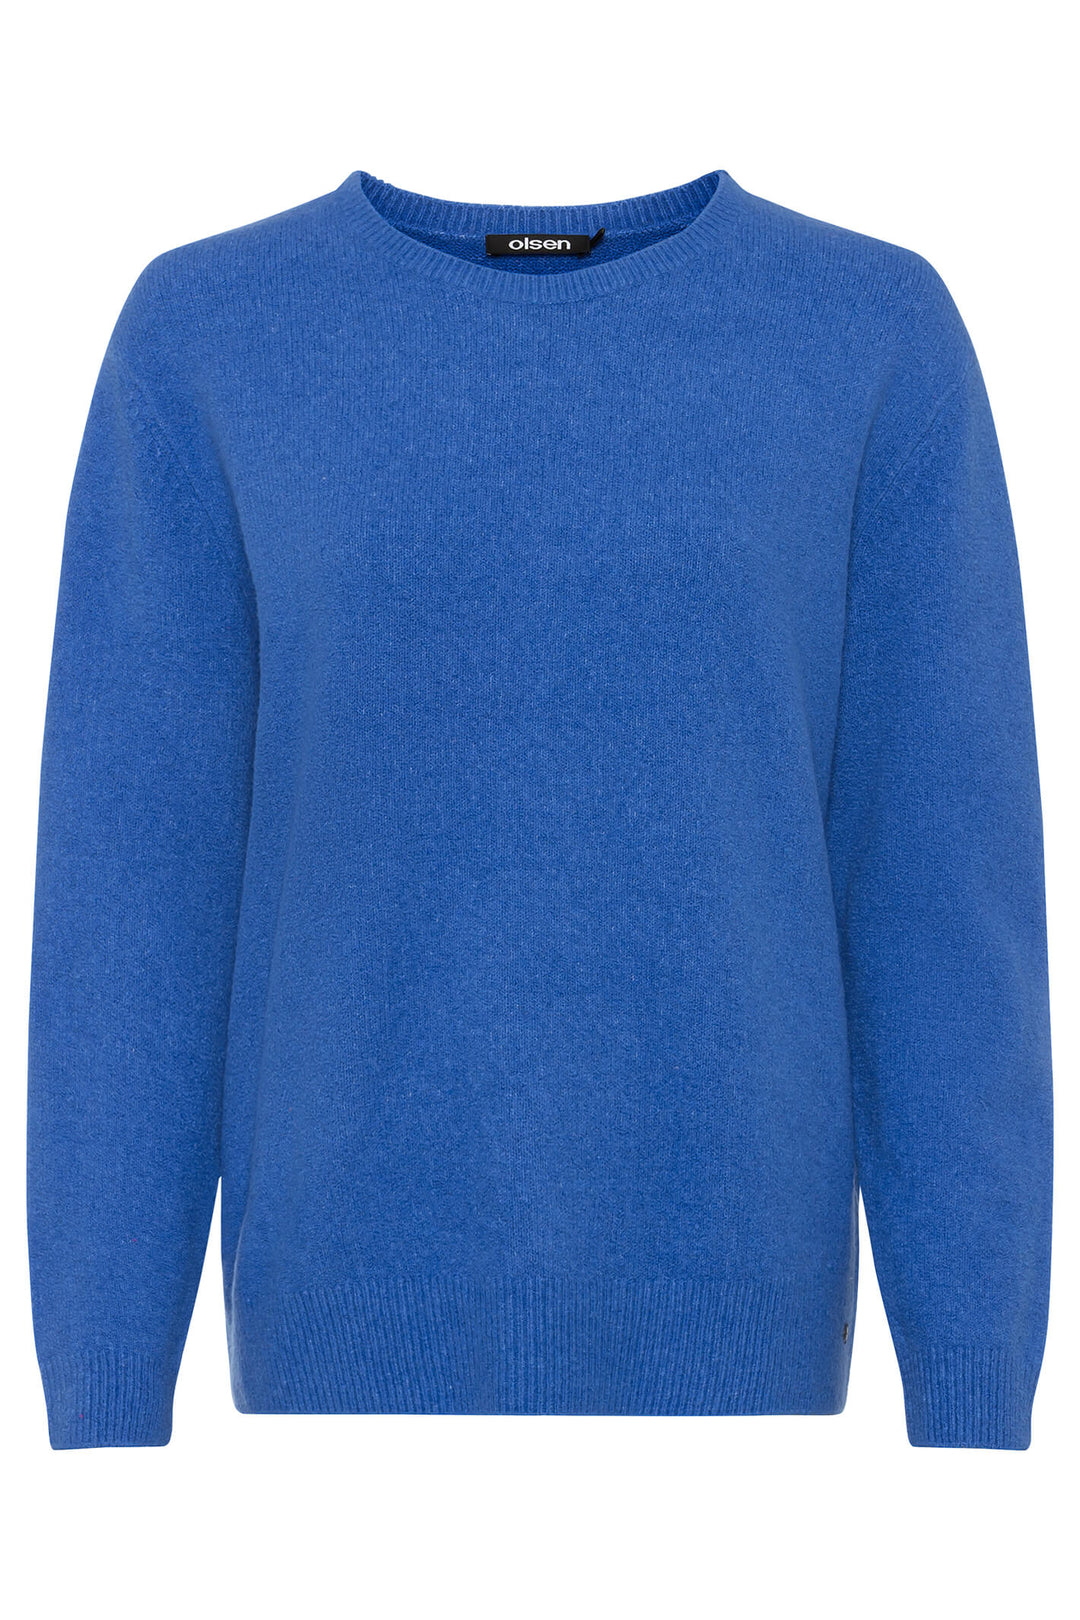 Olsen 11004139 Electric Blue Round Neck Jumper - Experience Boutique